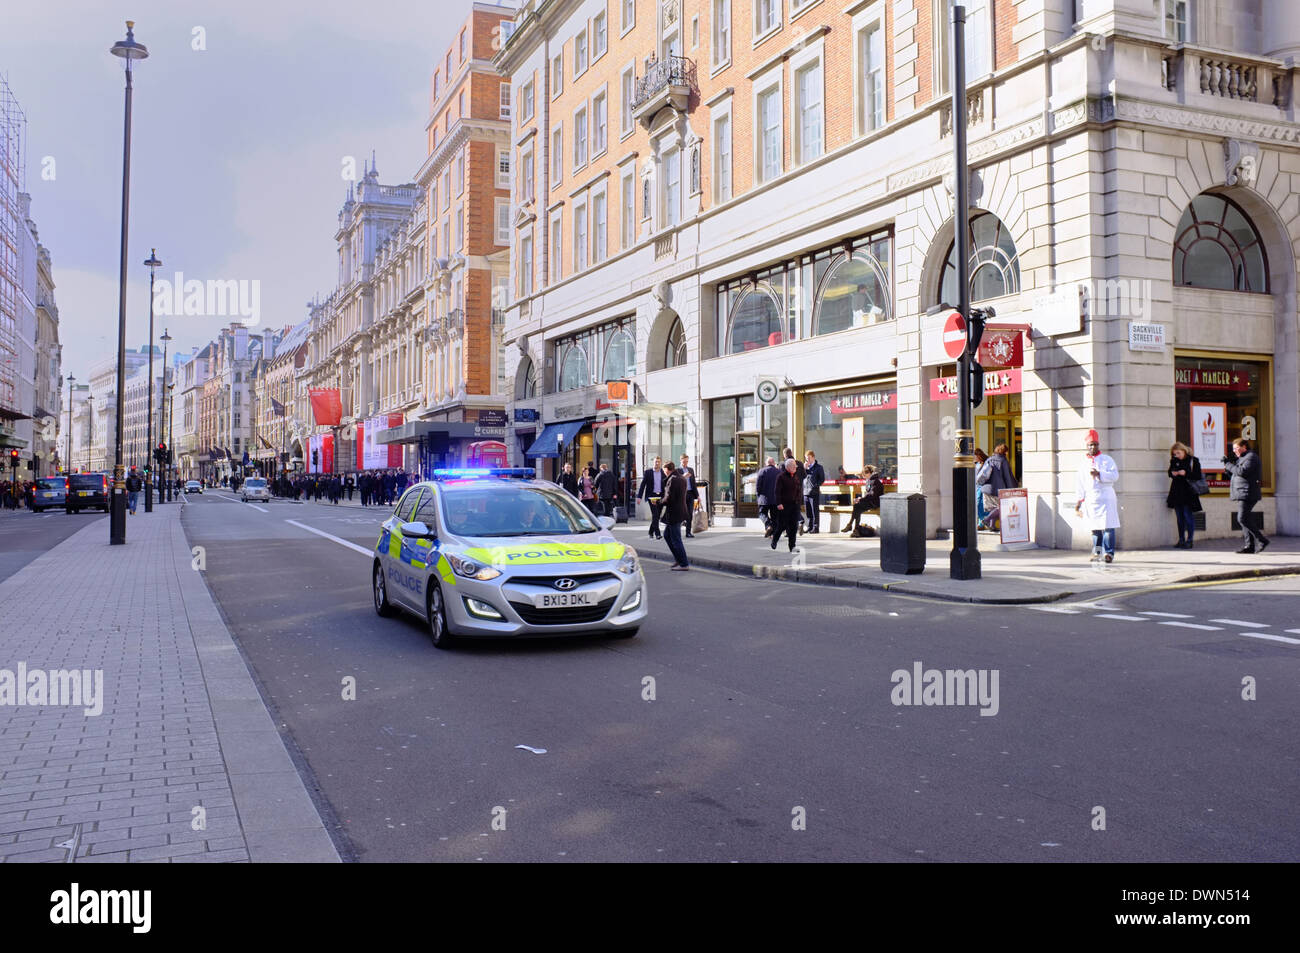 Police vehicle responding to an emergency in London Stock Photo